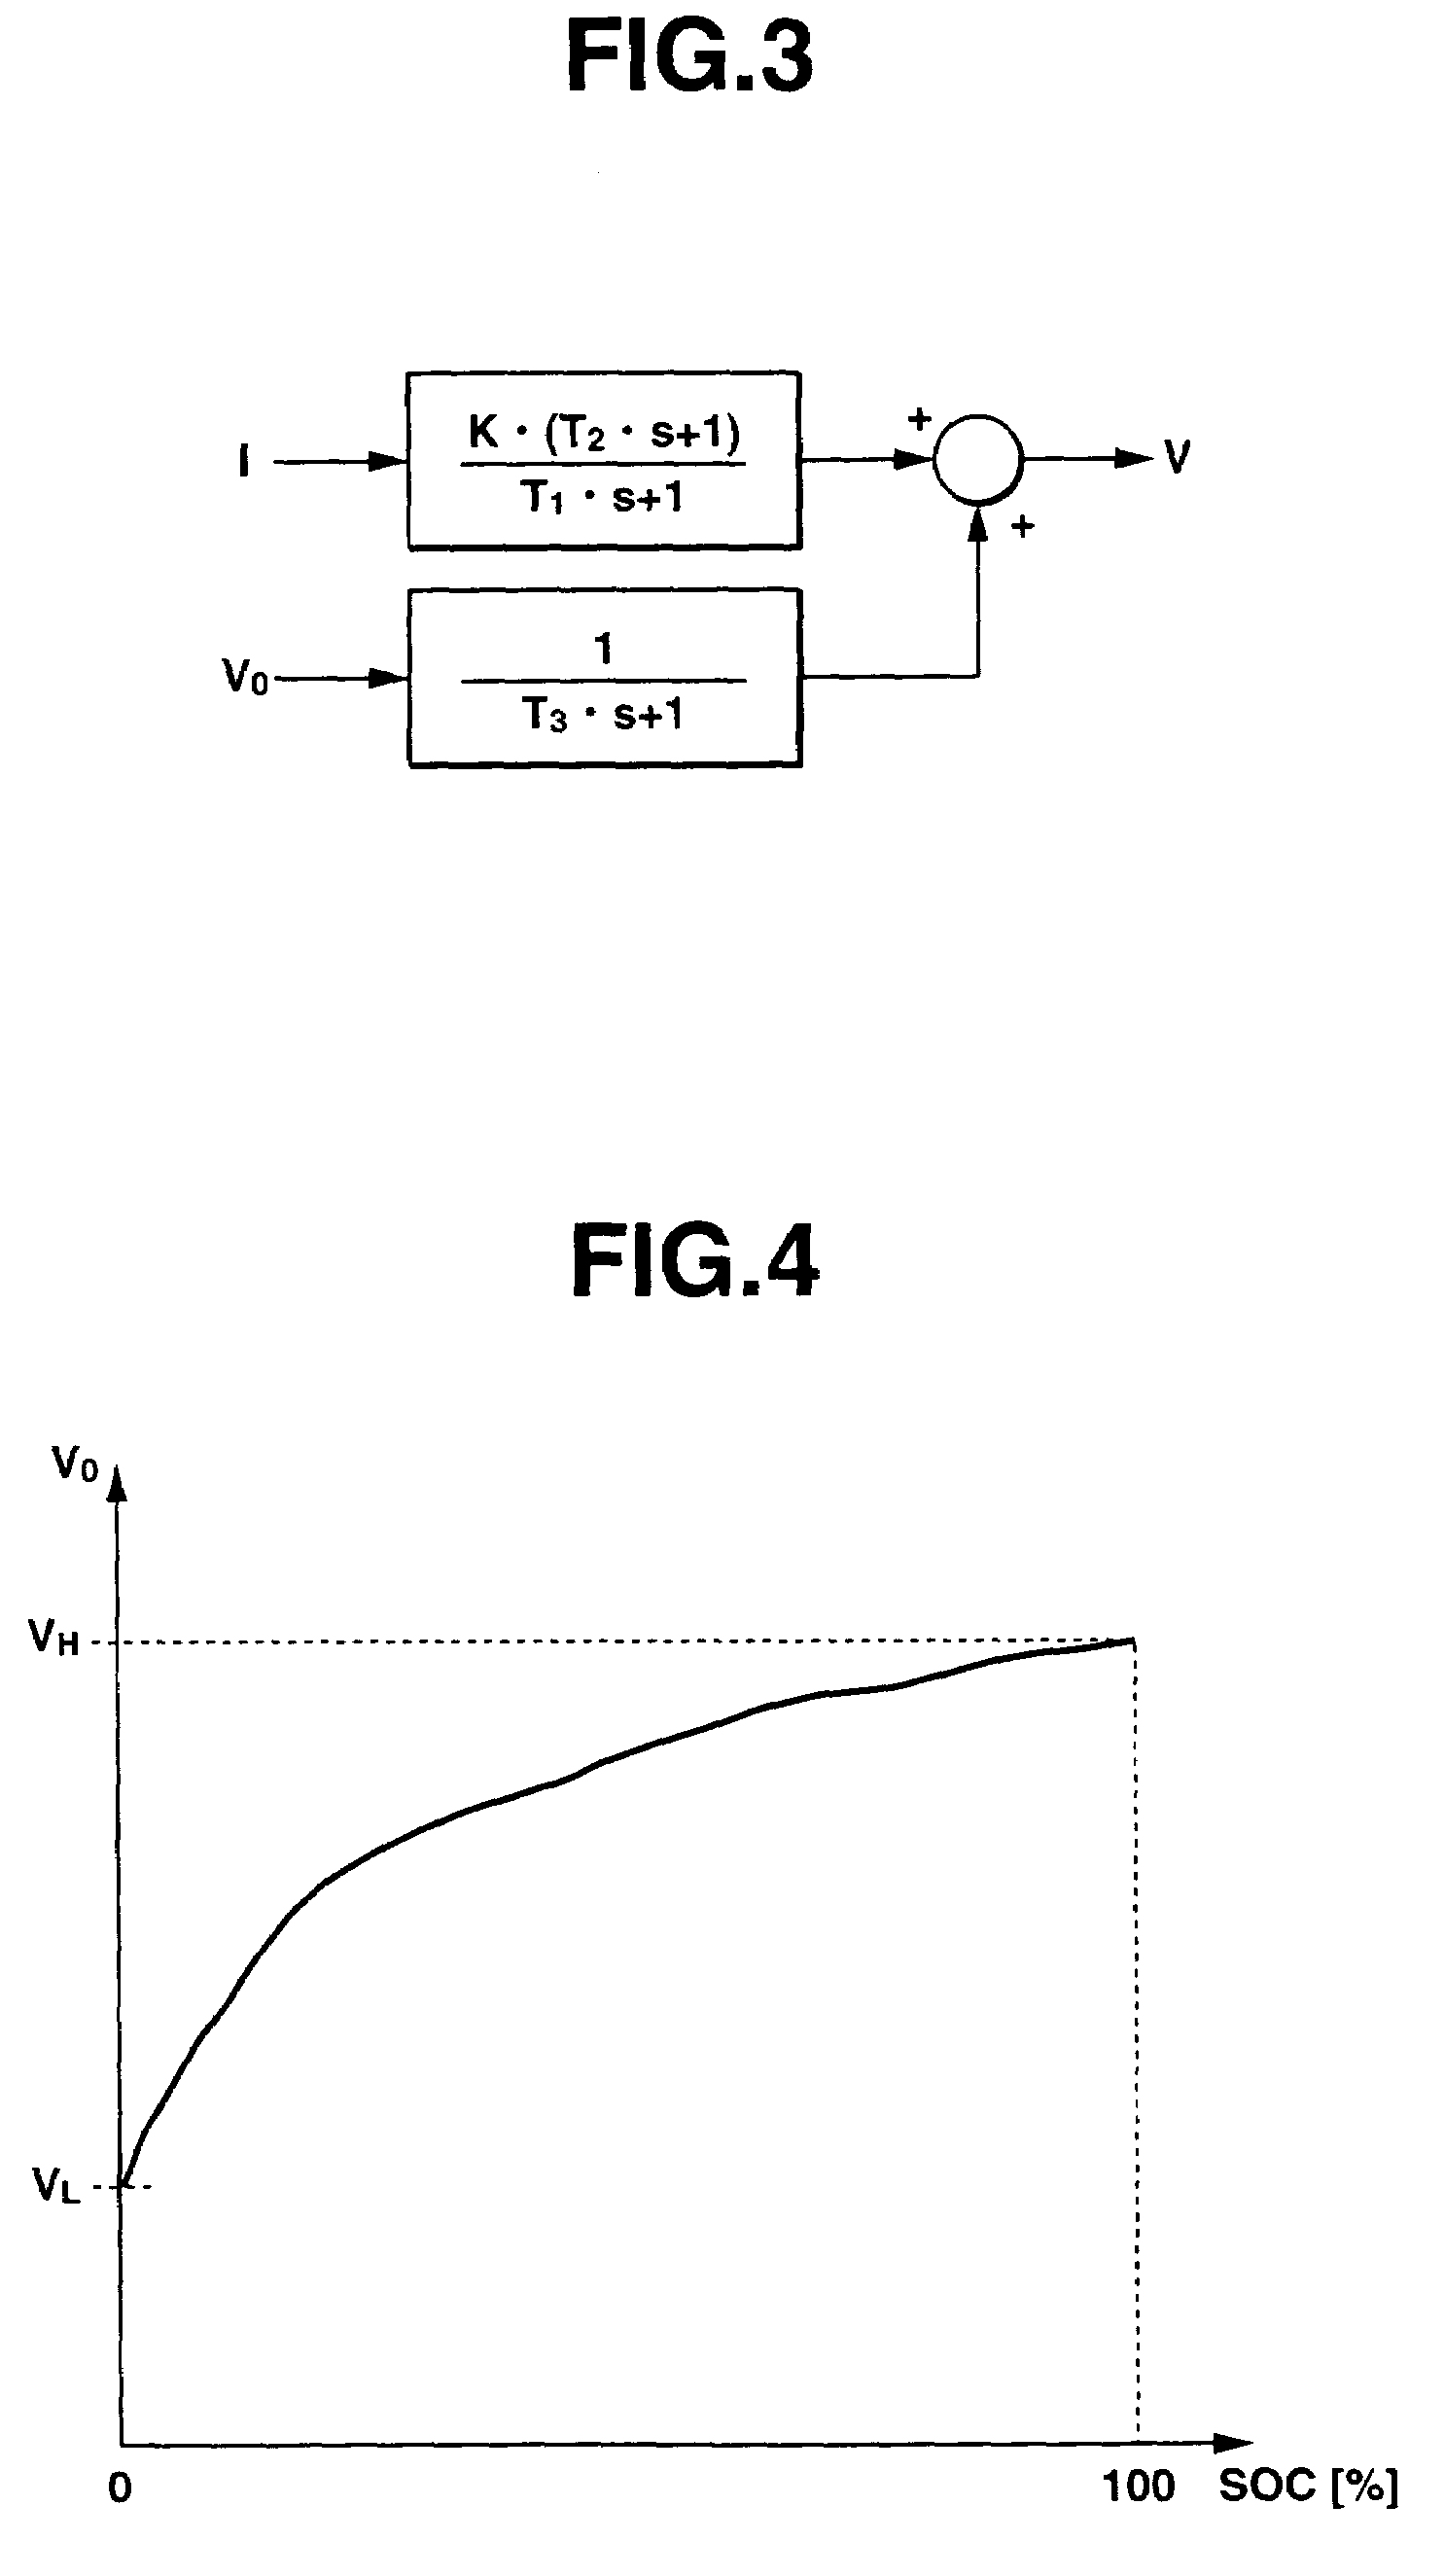 Apparatus and method for estimating charge rate of secondary cell